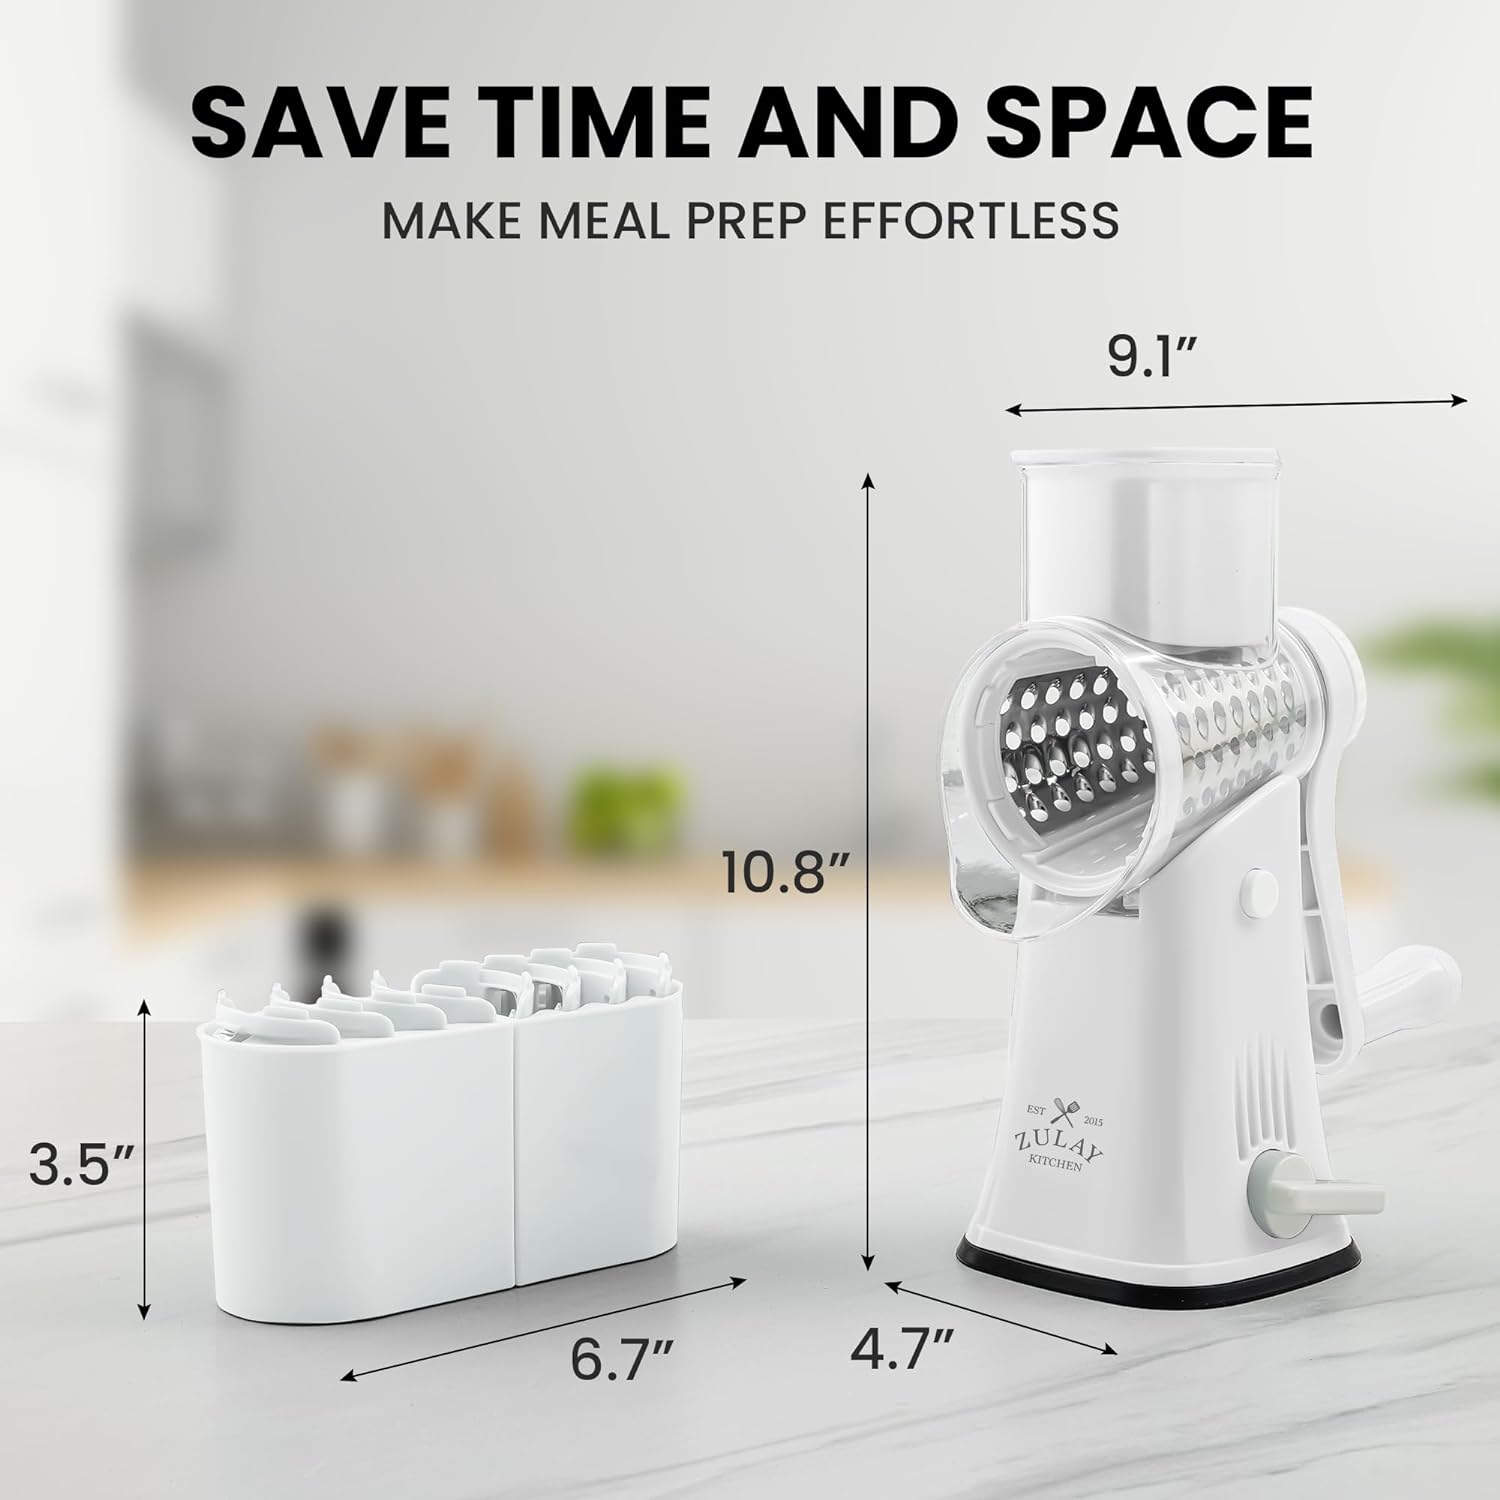 Rotary Cheese Grater with 5 Interchangeable Stainless Steel Blades